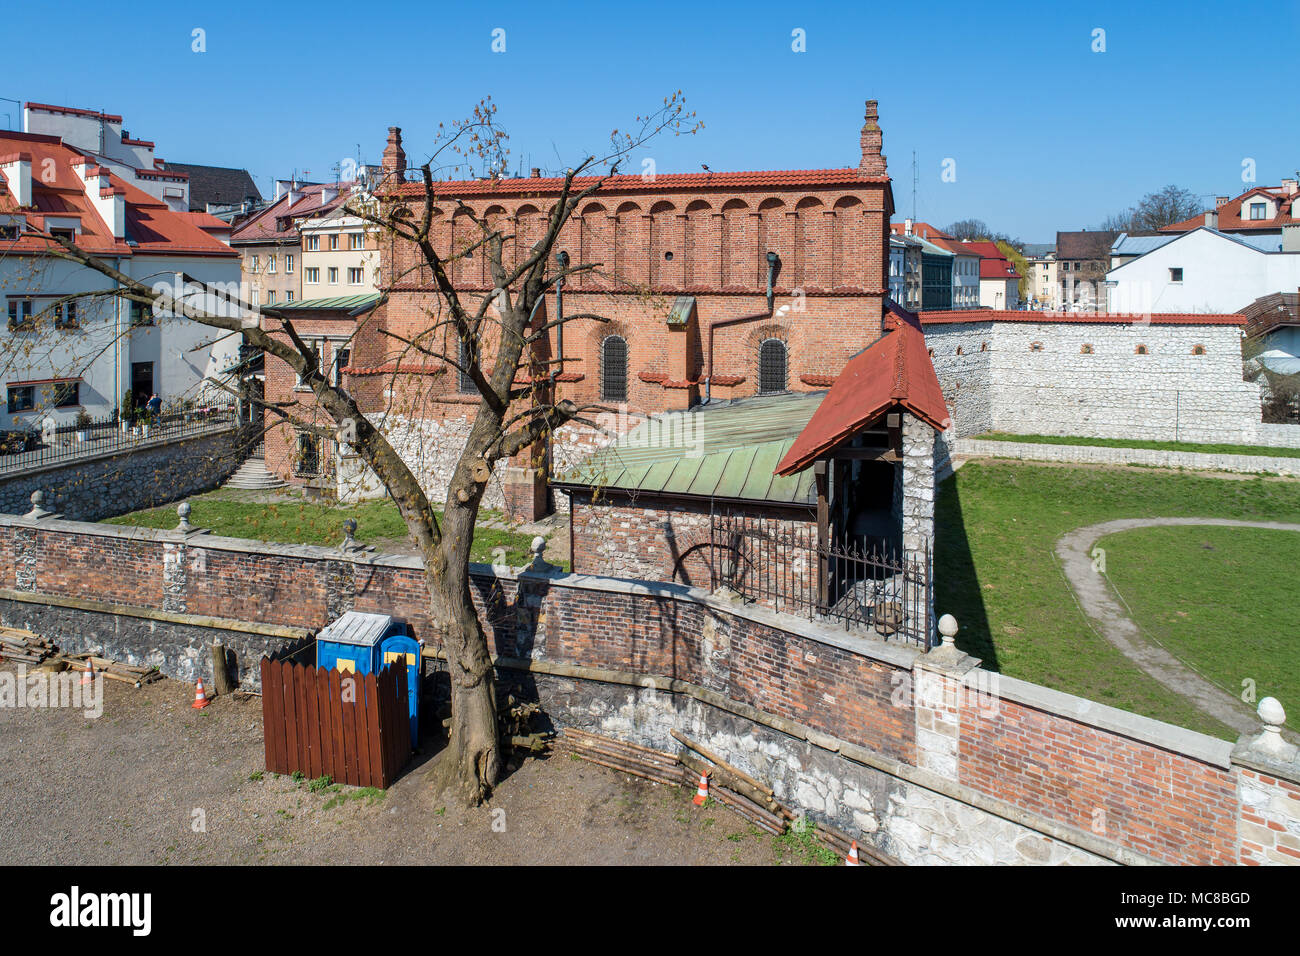 Old Synagogue in historic Jewish Kazimierz district of Cracow (Krakow), Poland. Aerial view Stock Photo